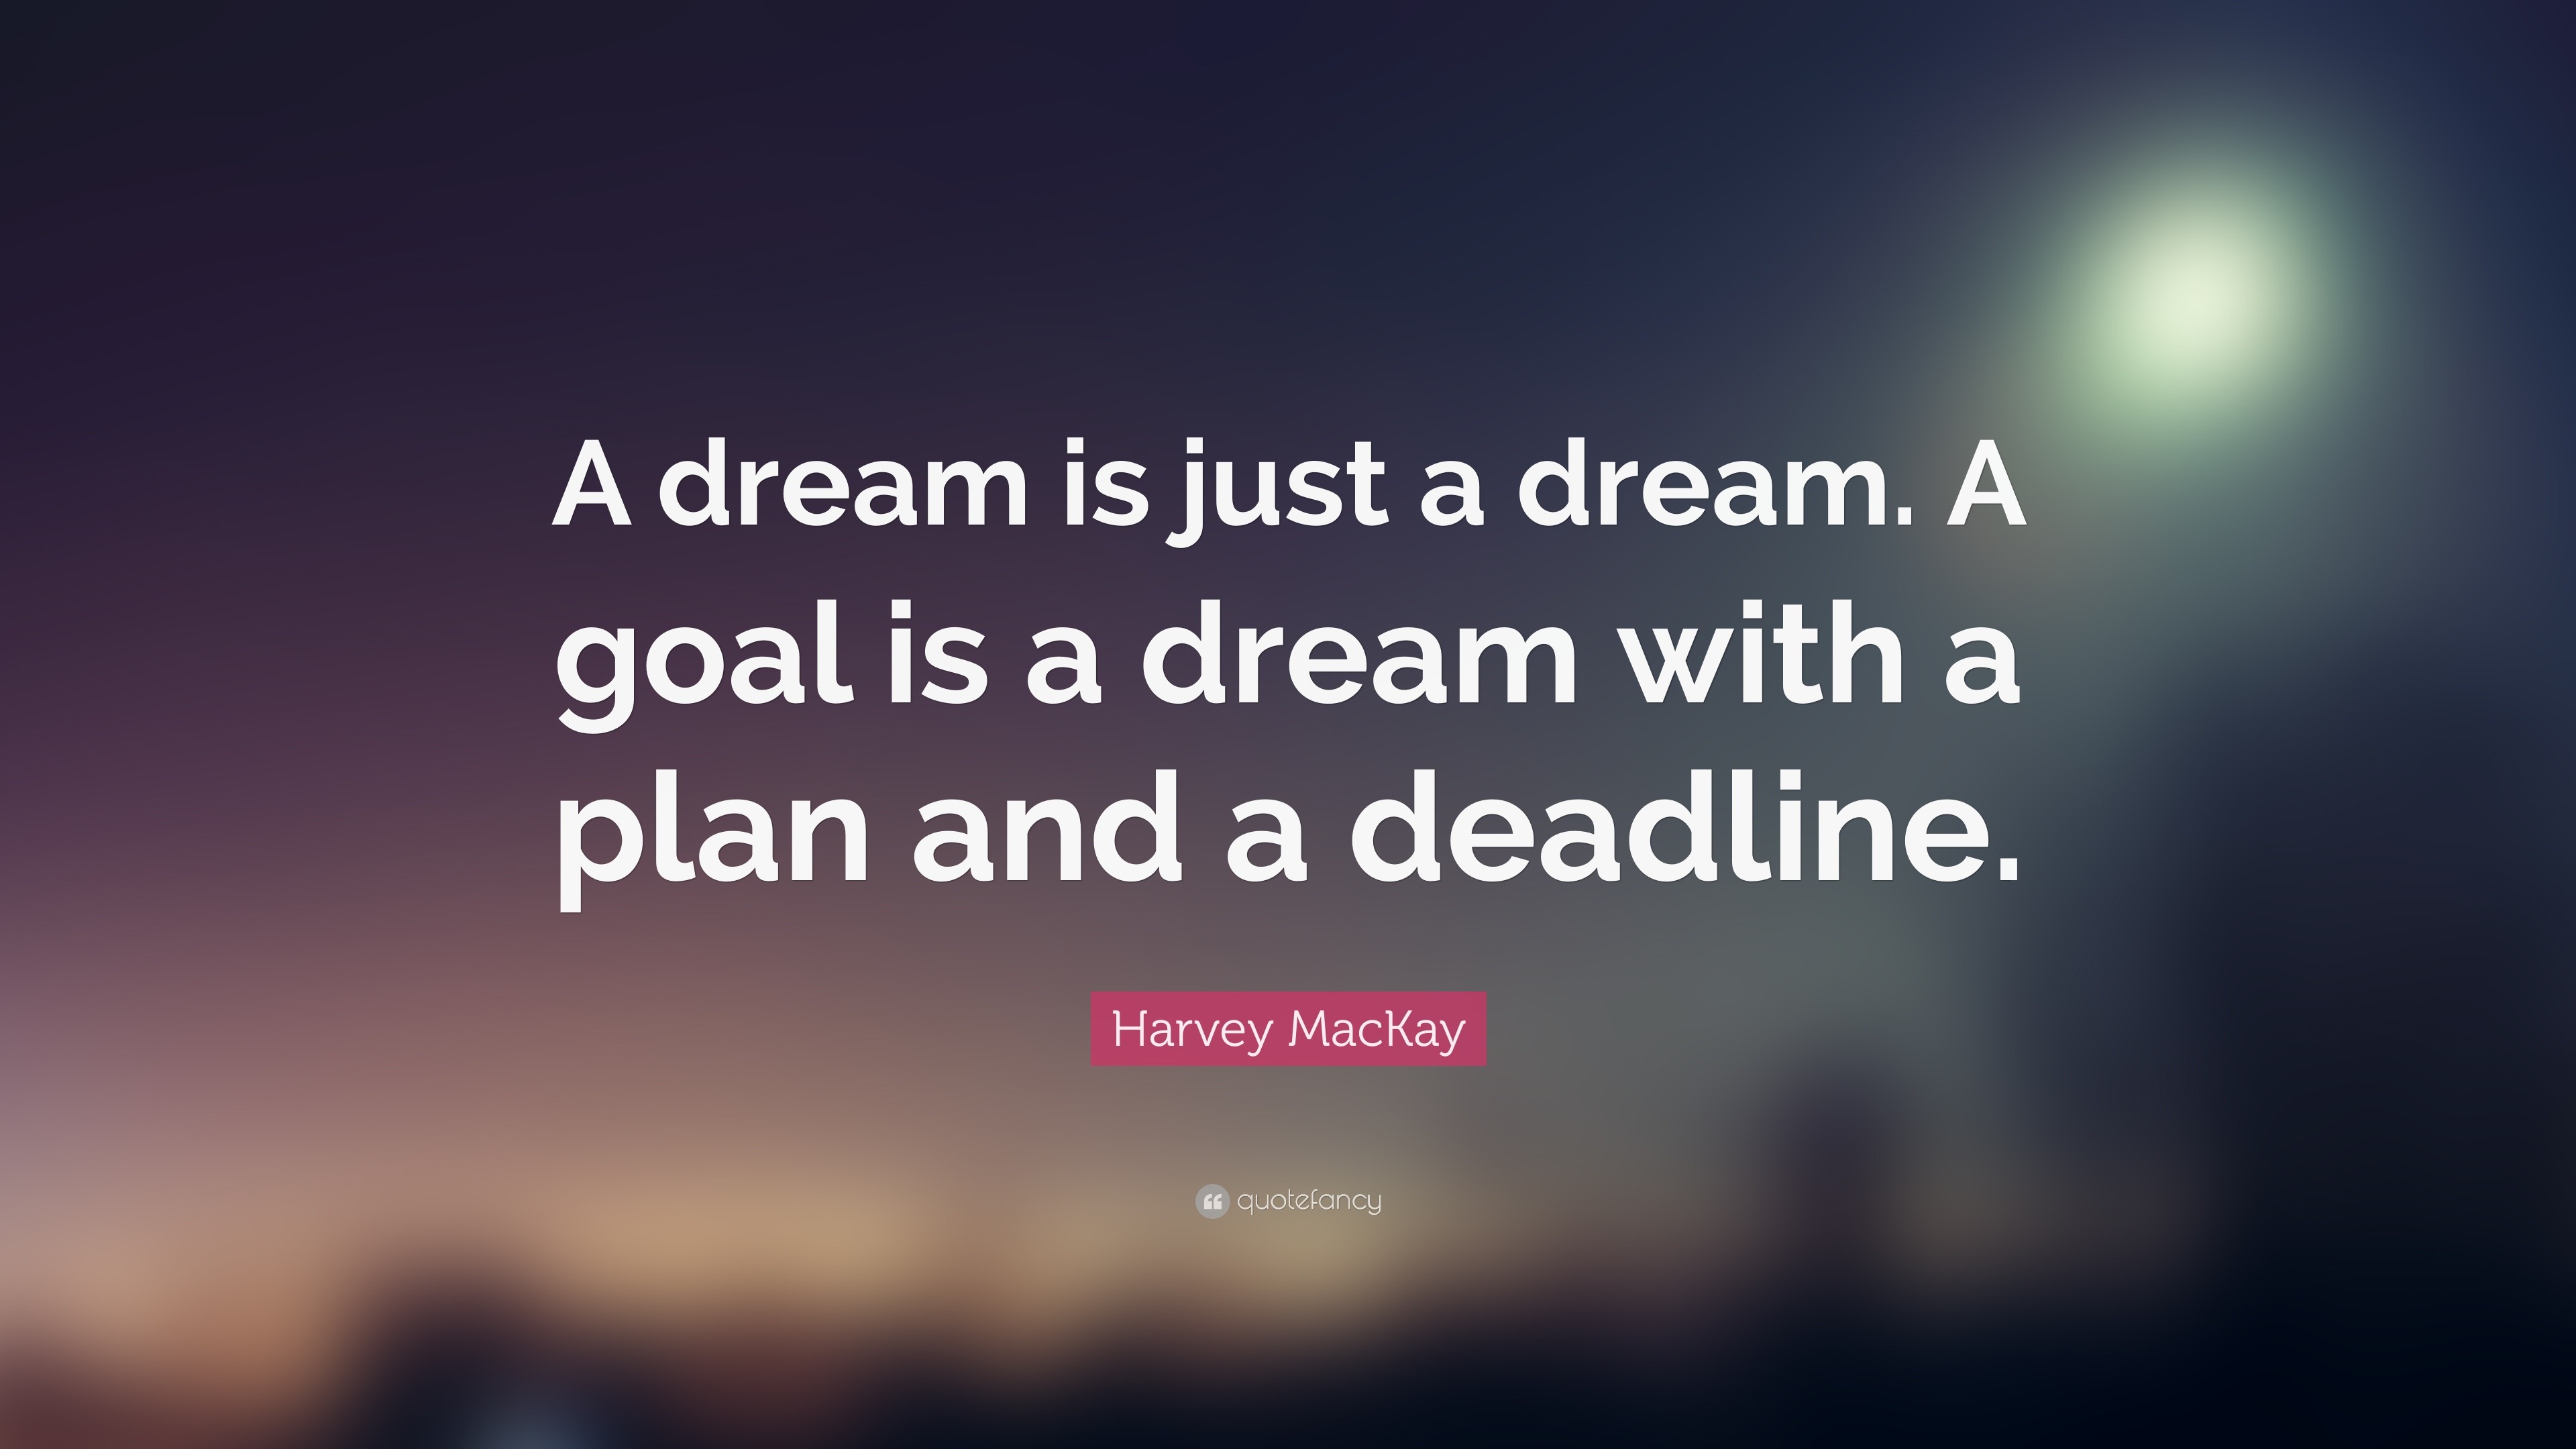 Harvey MacKay Quote: "A dream is just a dream. A goal is a dream with a ...